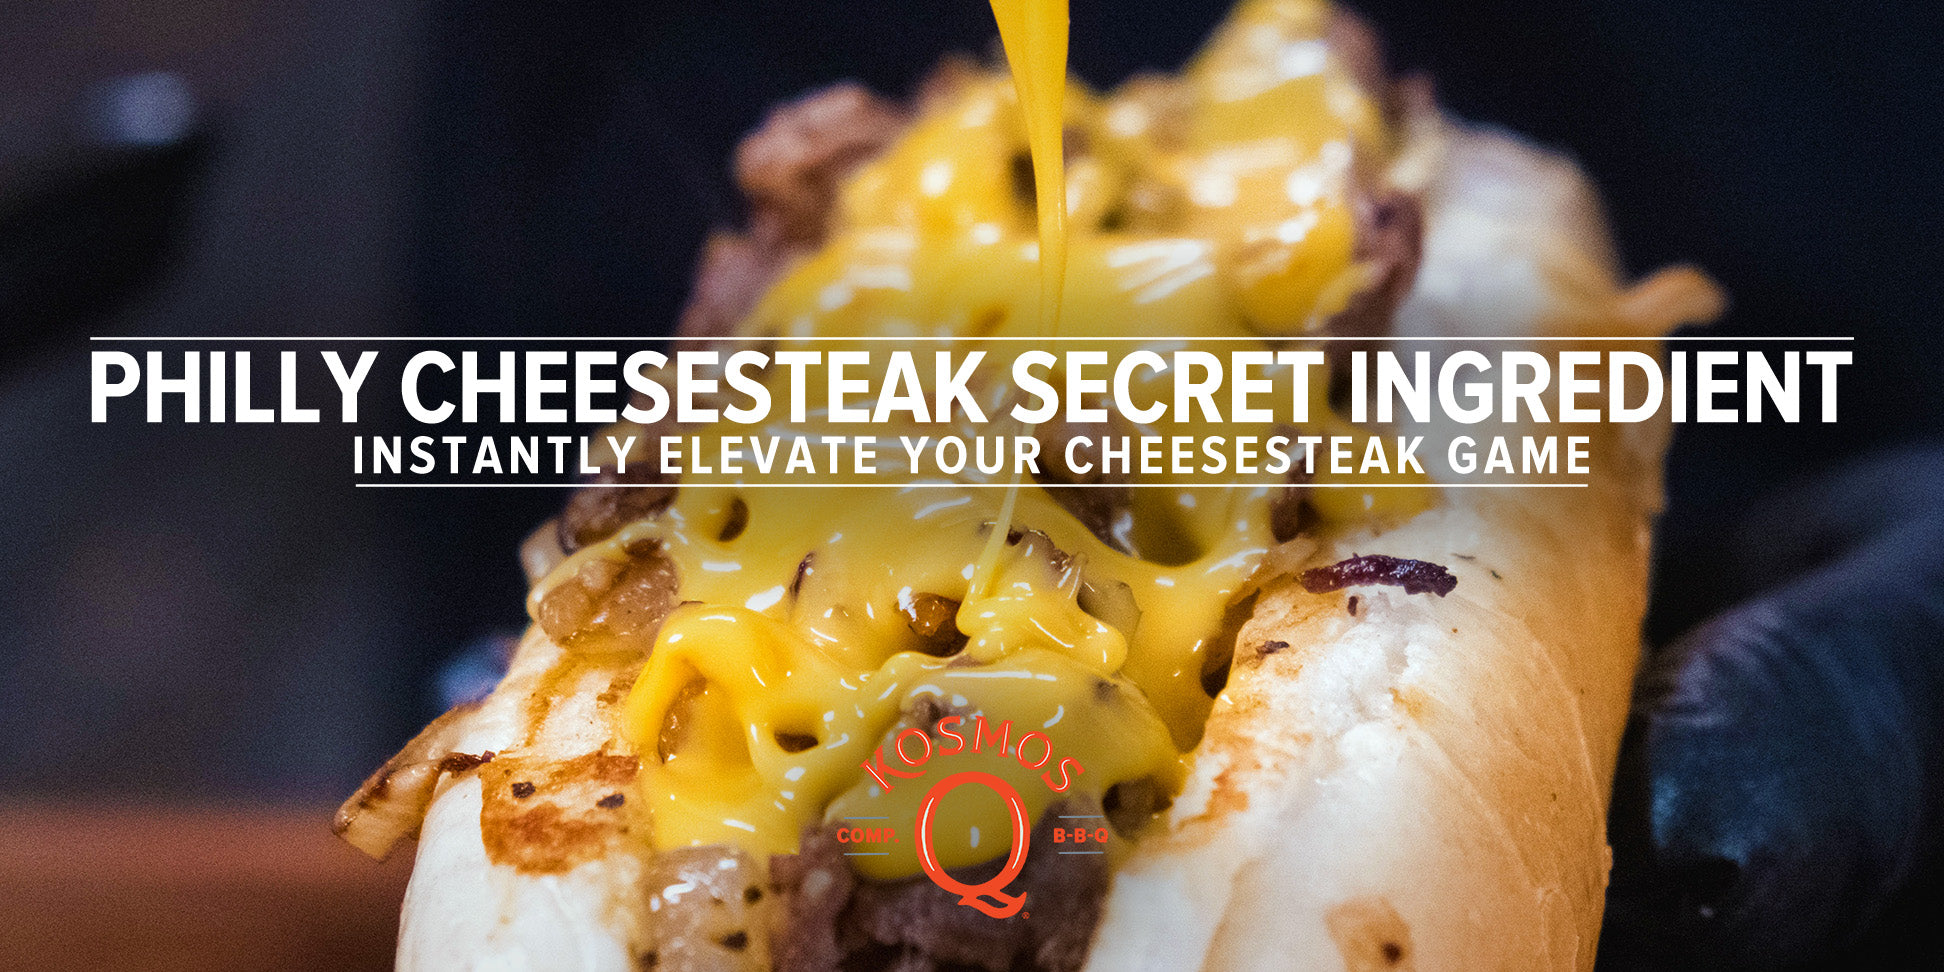 The Ultimate Philly Cheesesteak Secret Ingredient